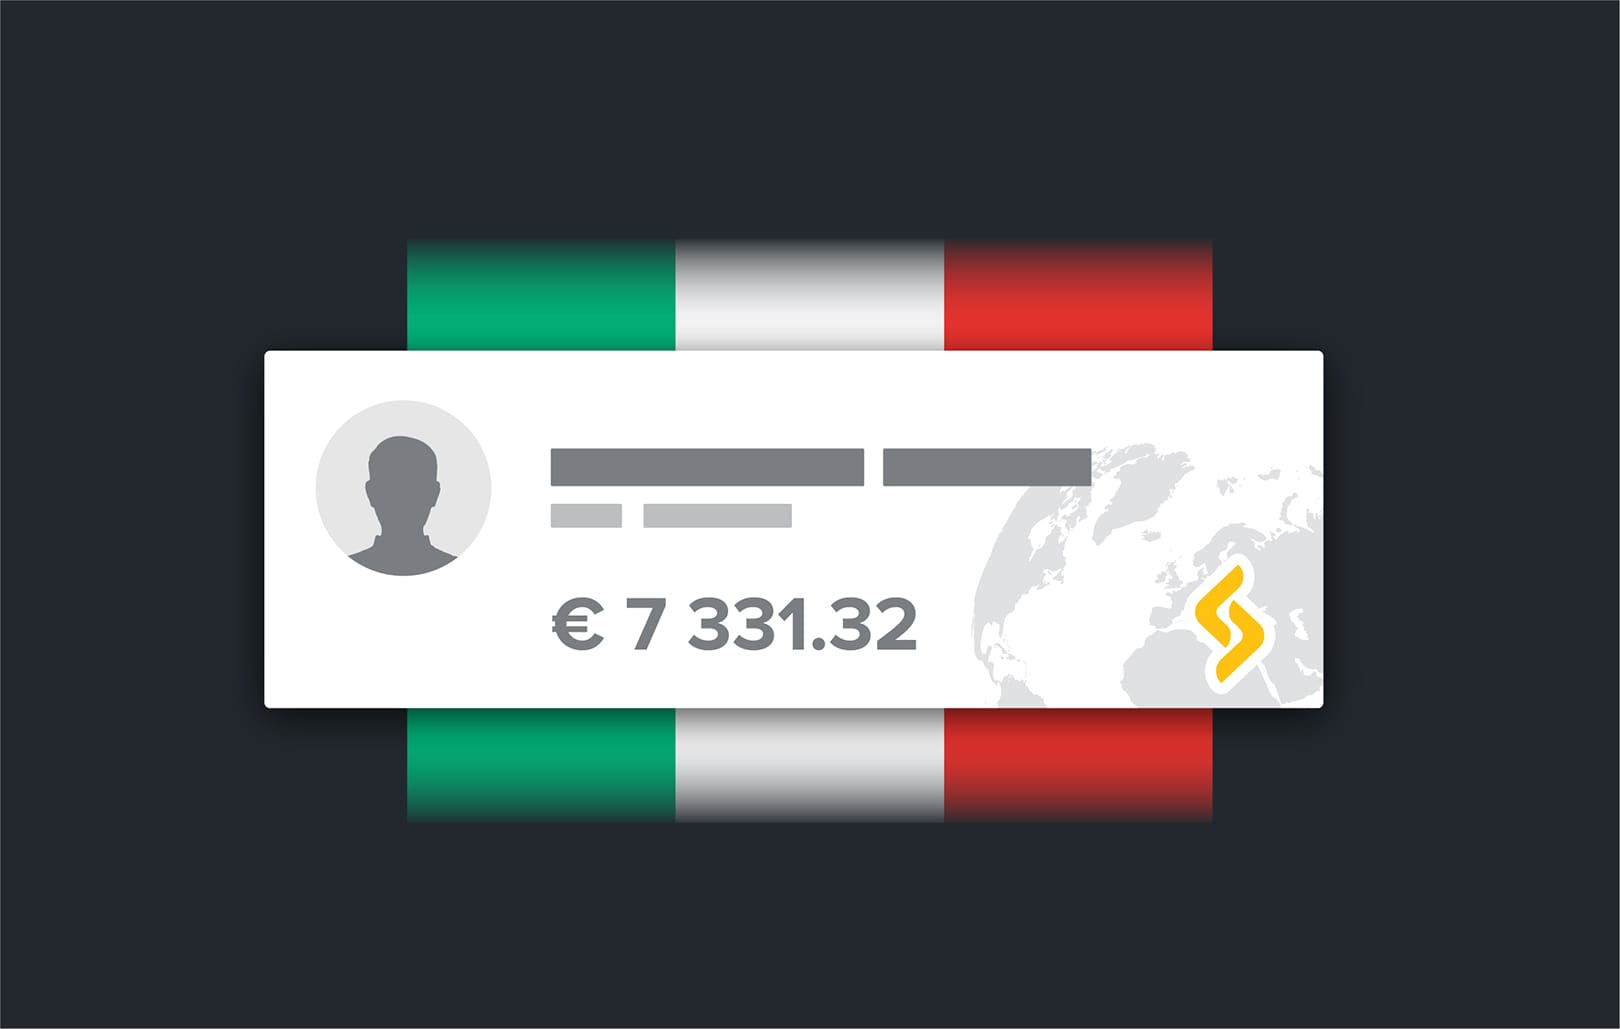 How to Open a Bank Account in Italy?